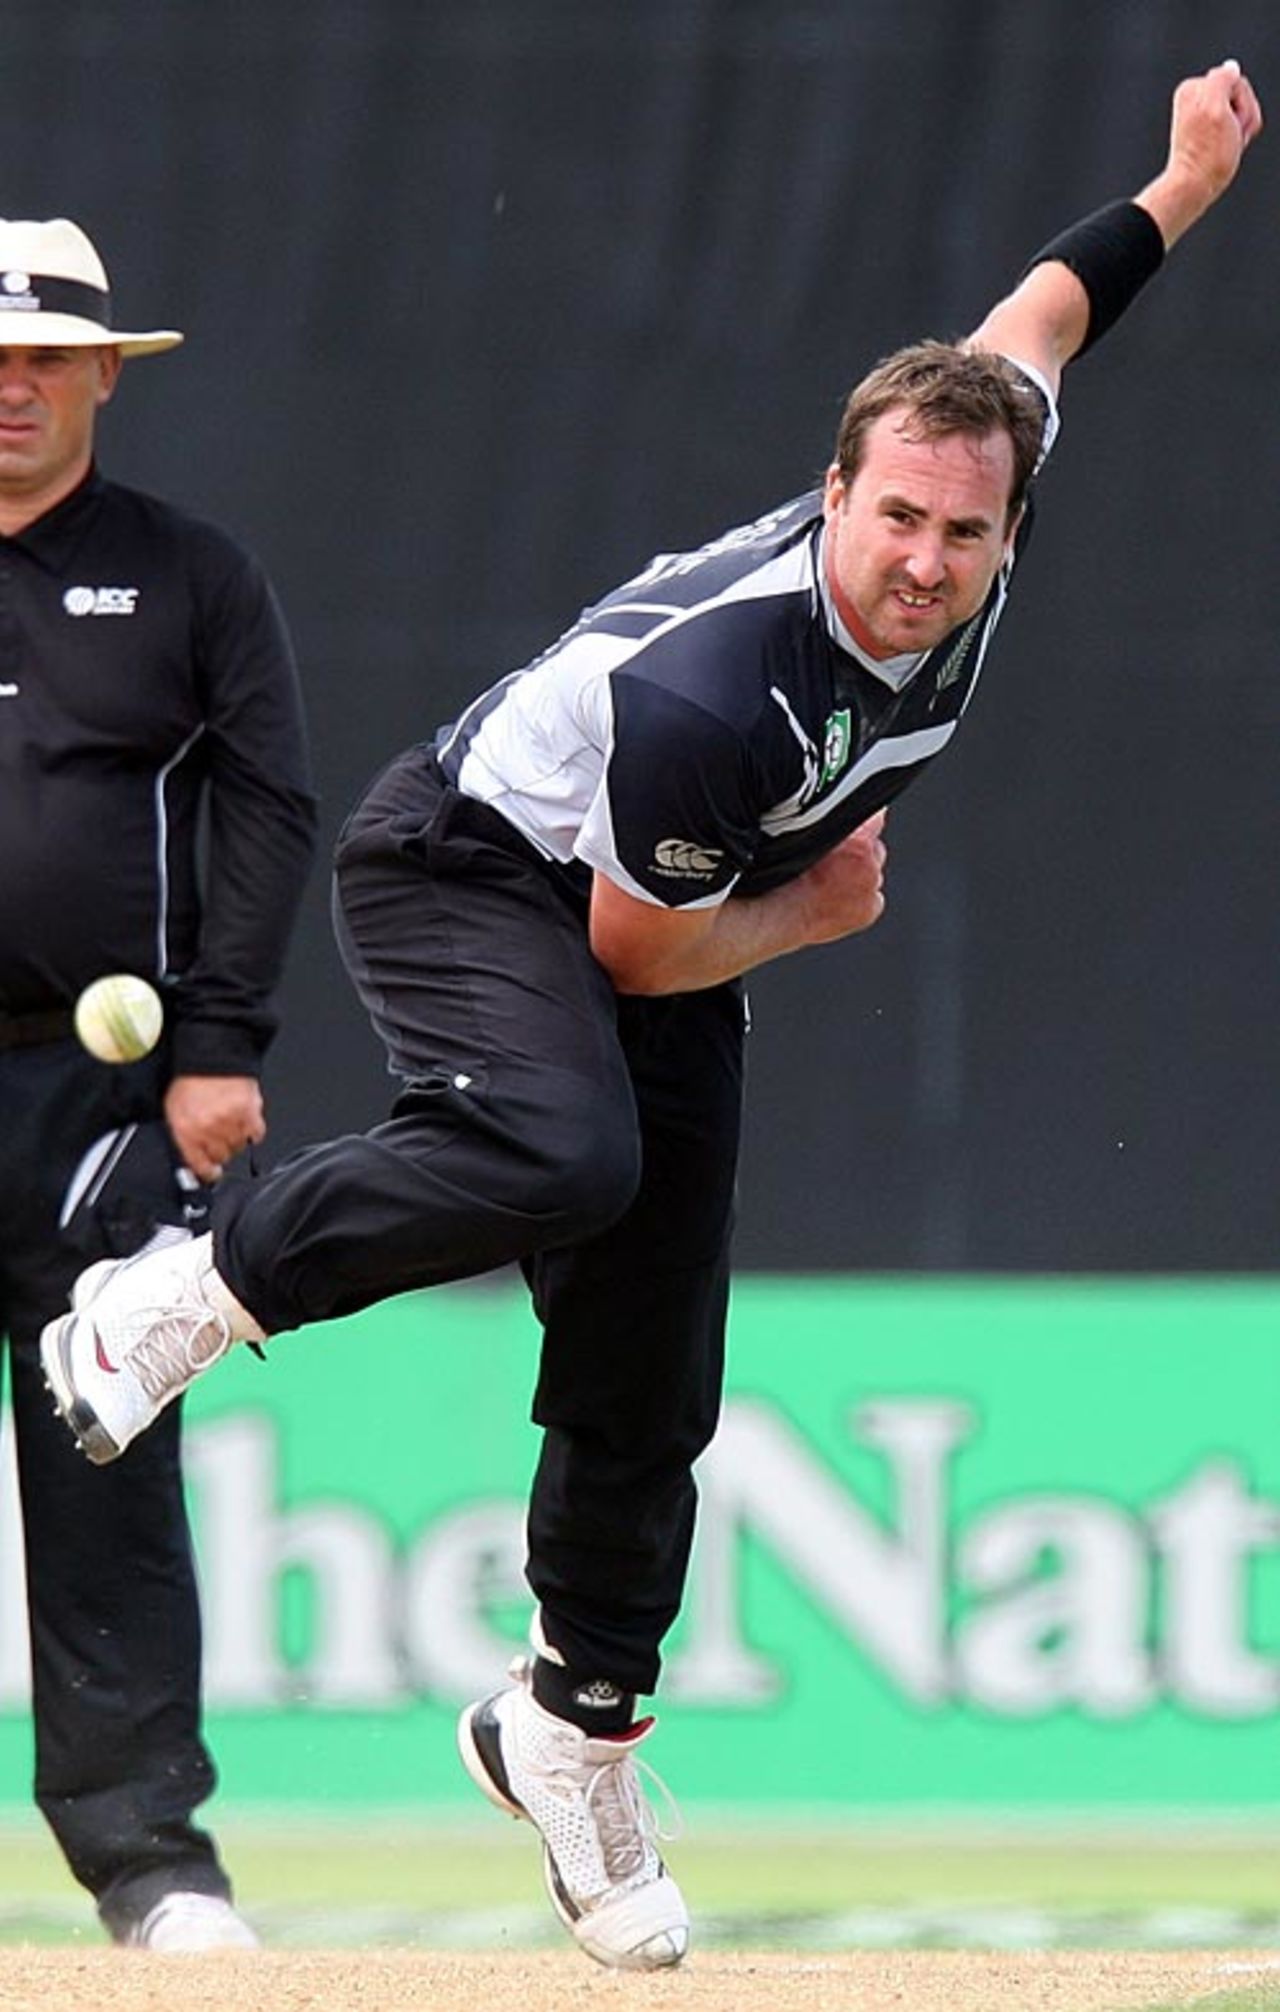 Mark Gillespie in action, New Zealand v West Indies, 5th ODI, Napier, January 13, 2009